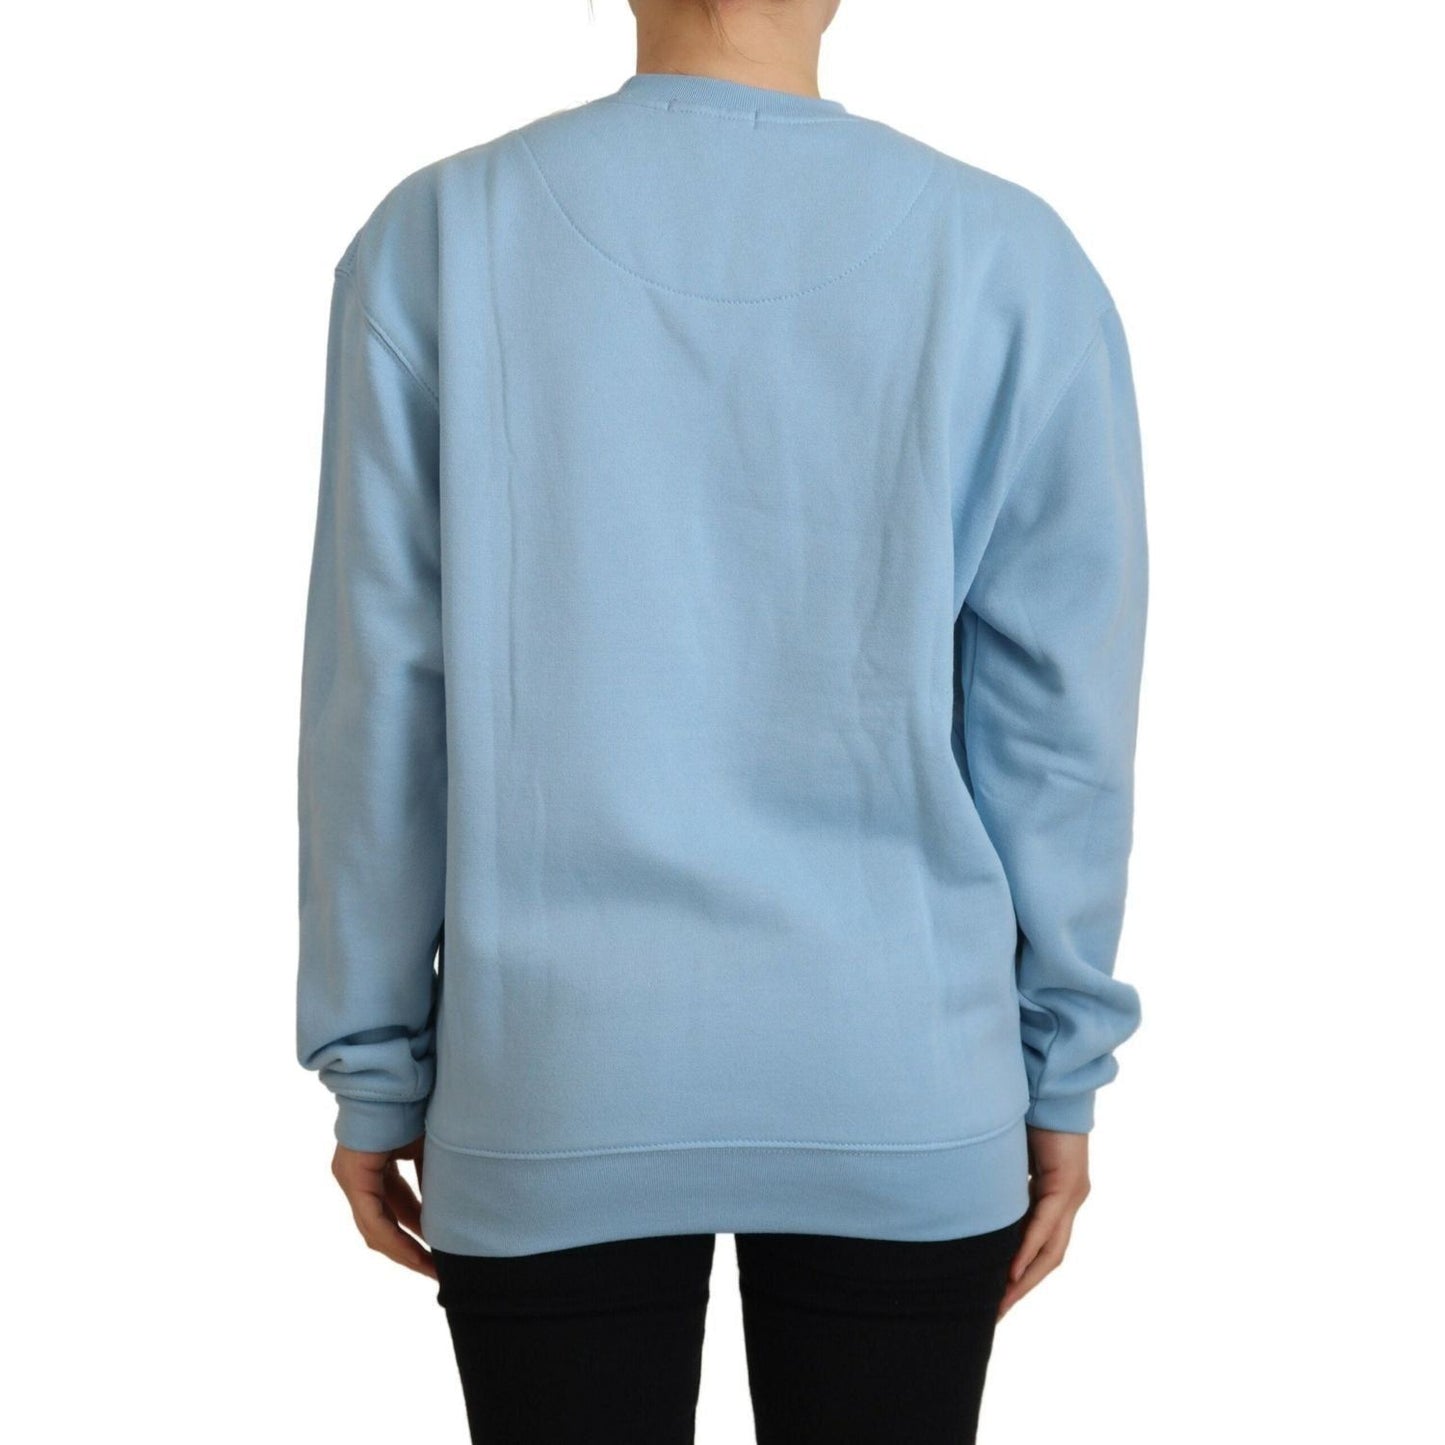 Philippe Model Elegant Light Blue Cotton Pullover Sweater light-blue-logo-printed-long-sleeves-sweater-2 IMG_9310-1-scaled-deaa945b-82a.jpg